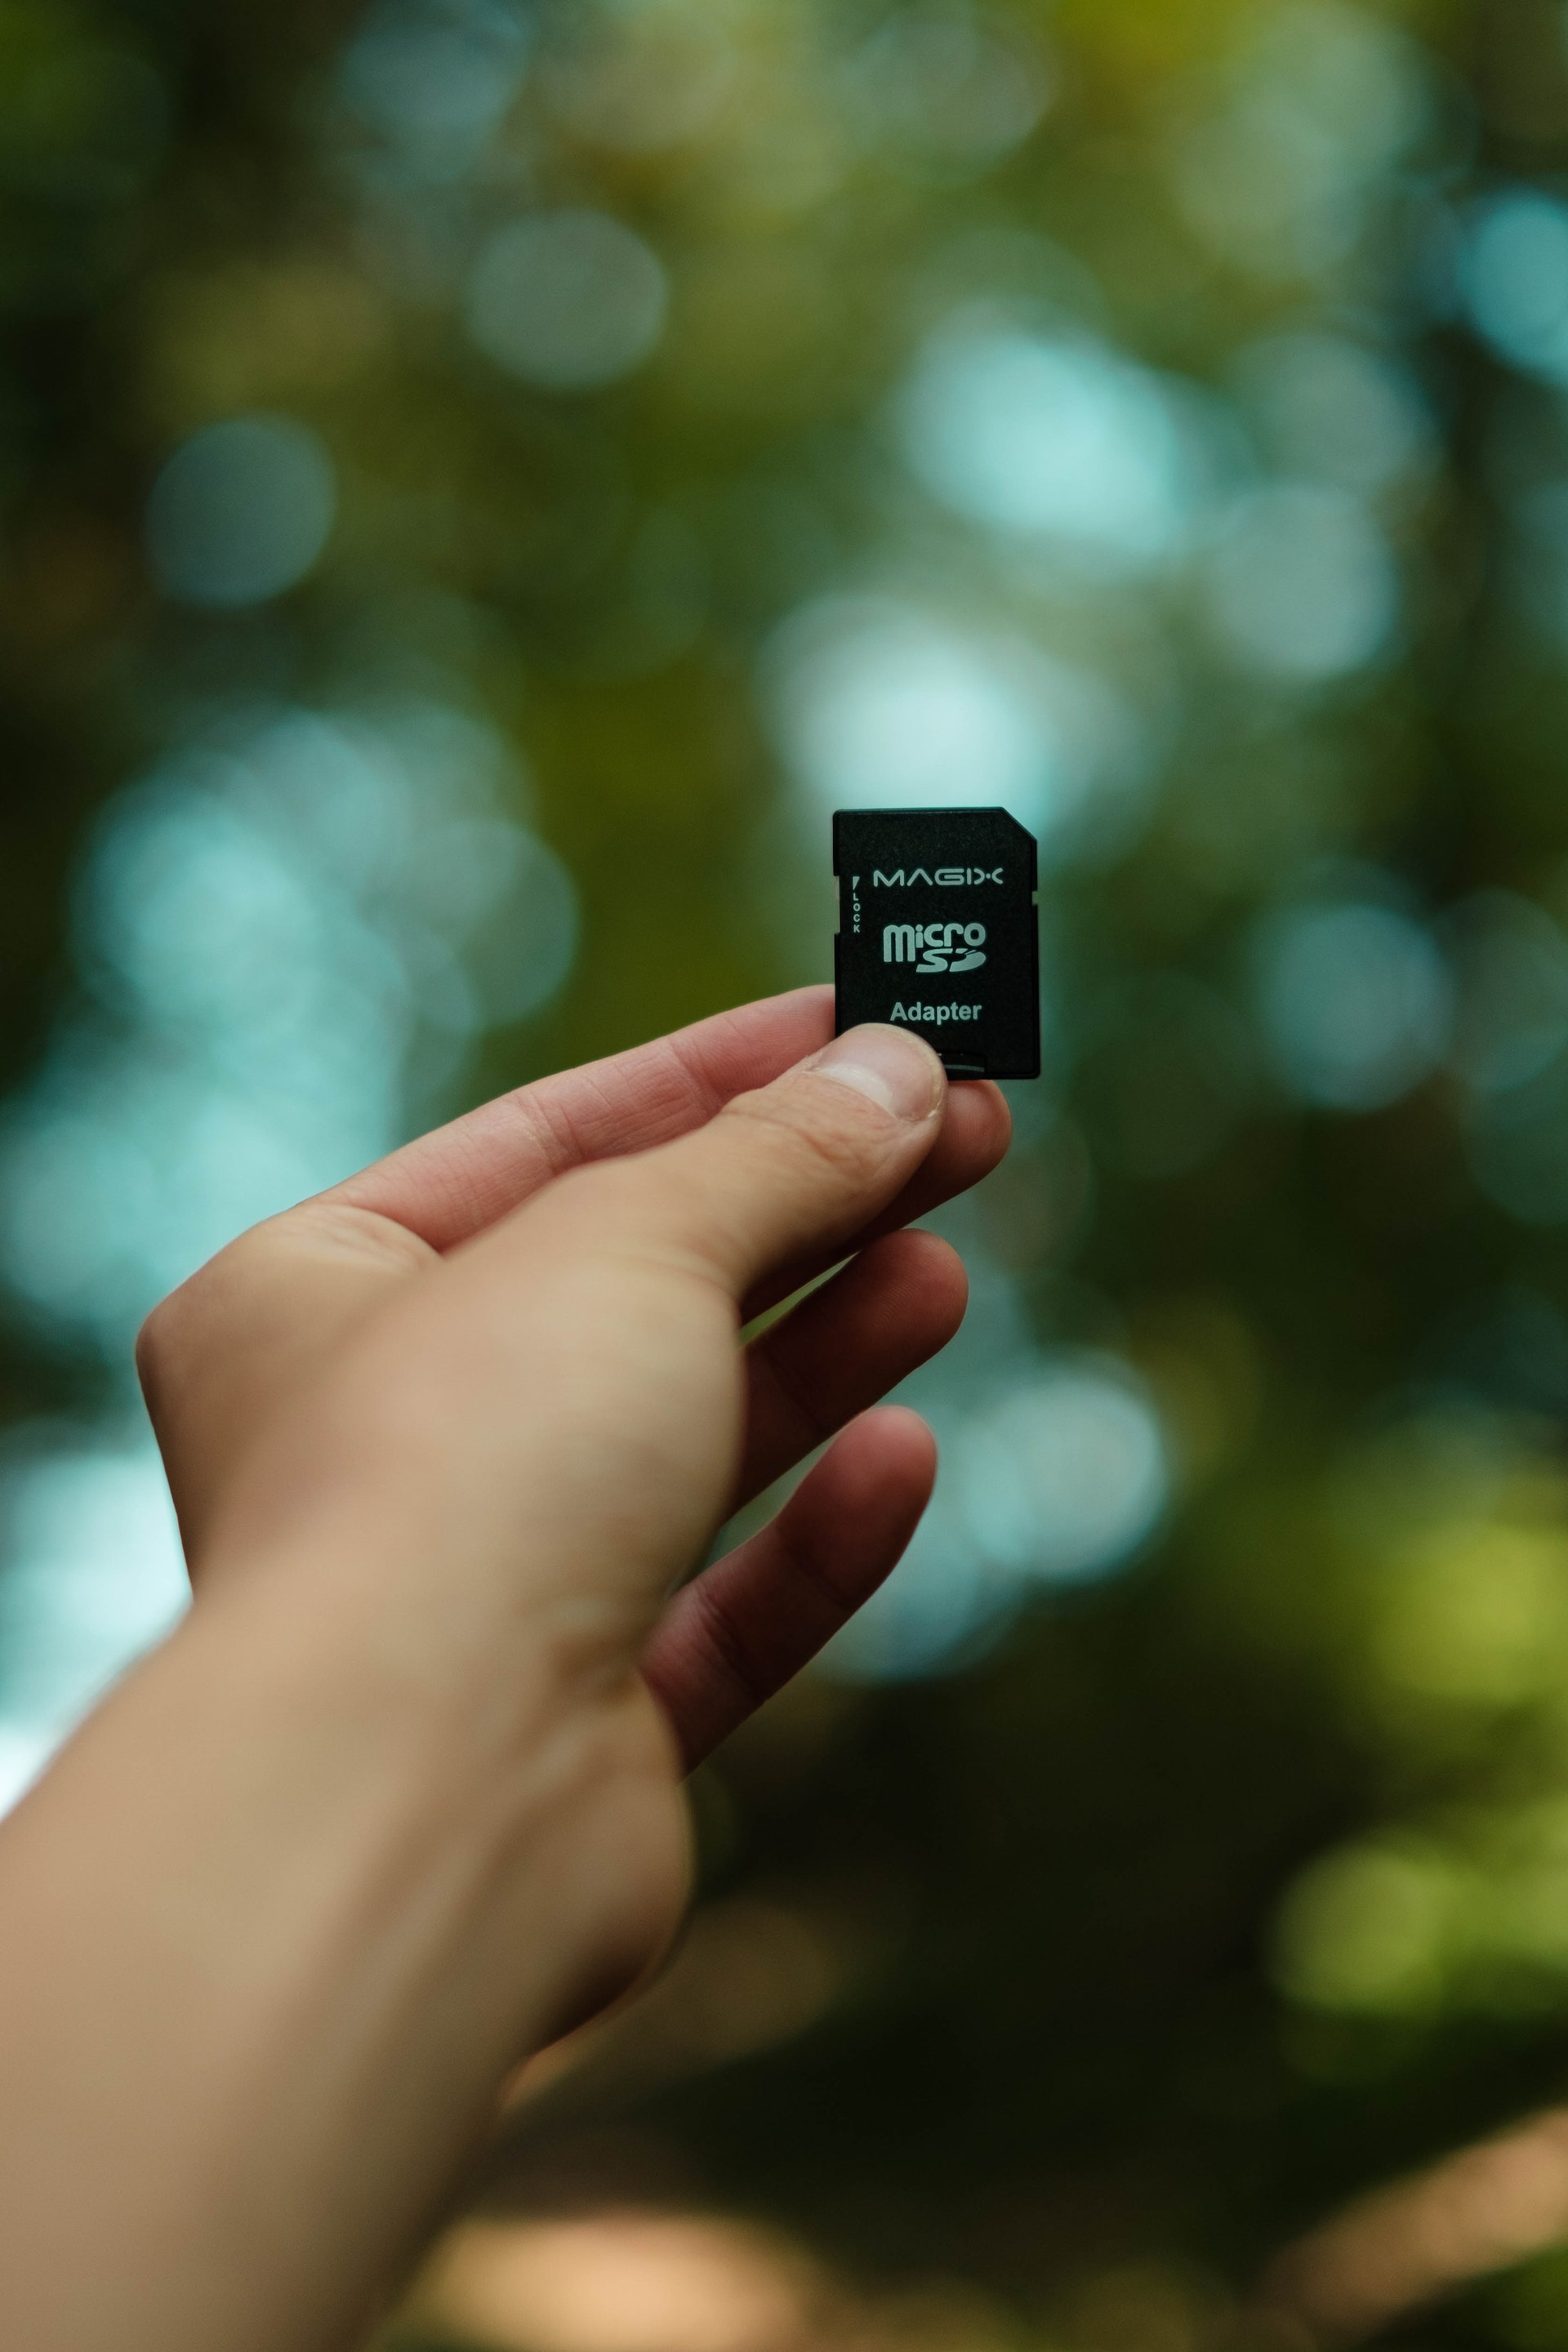 A person holding an SD card | Source: Pexels